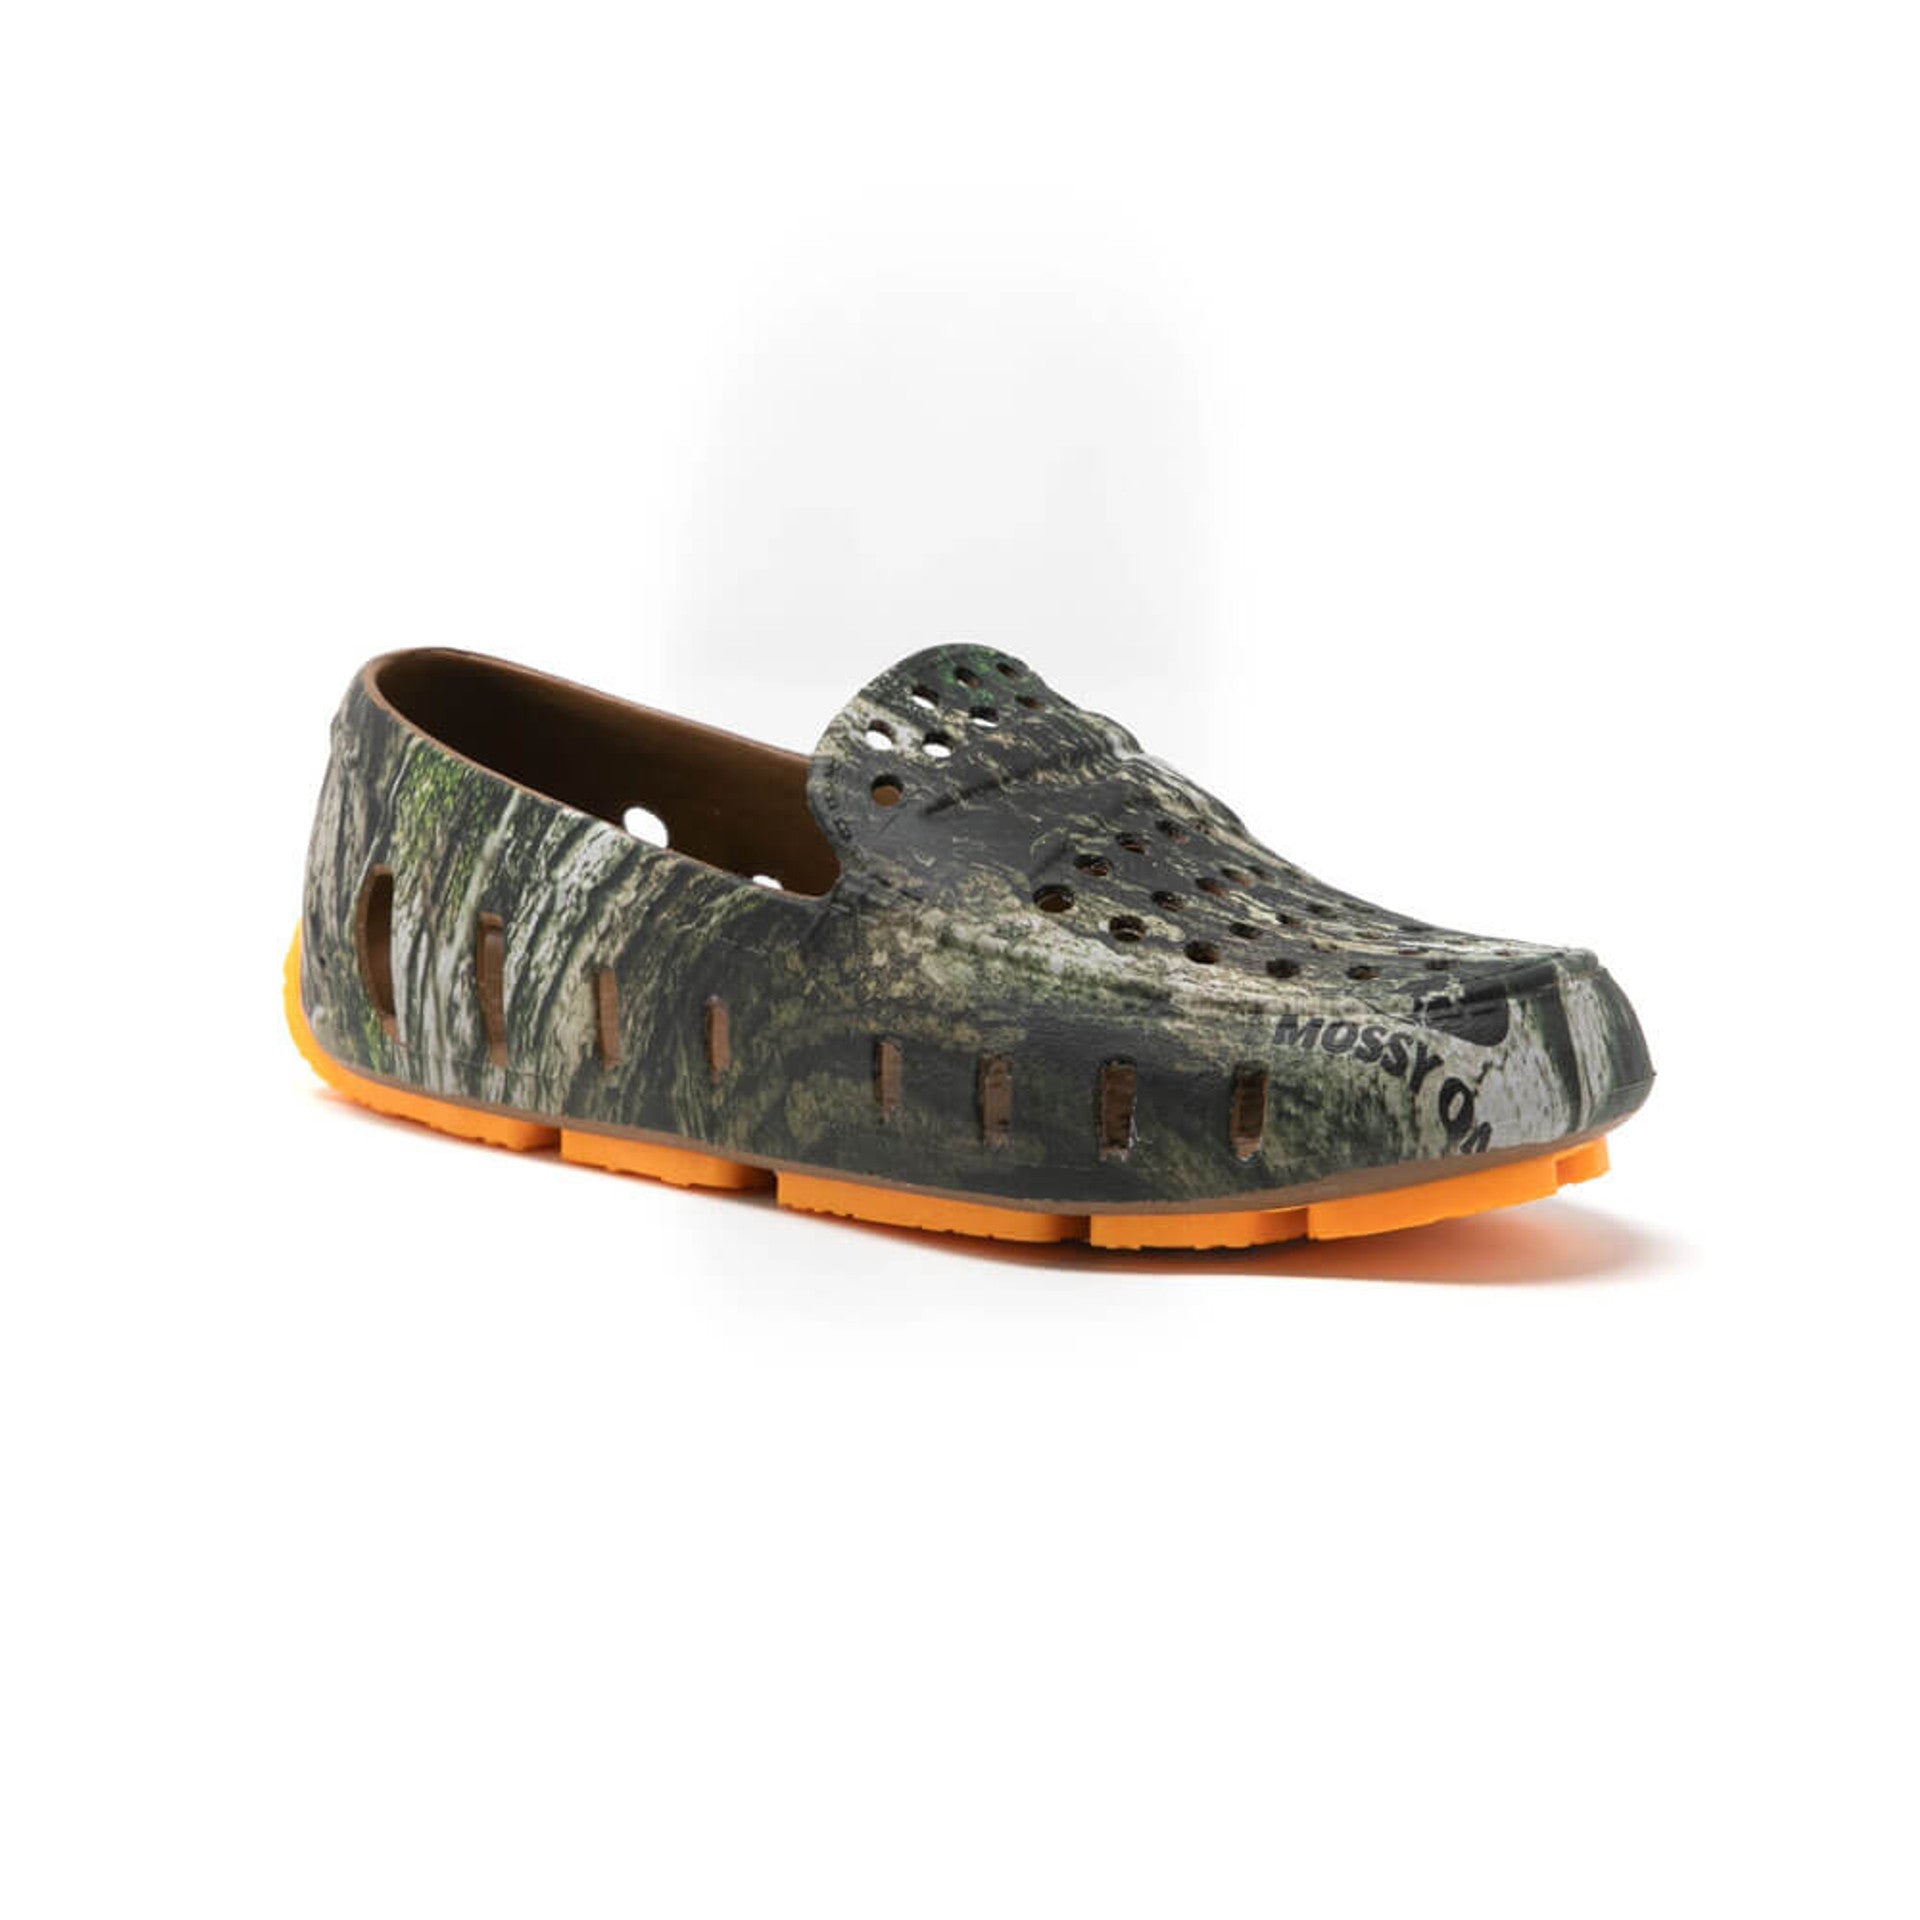 Floafers - Prodigy Driver - Mossy Oak Camo